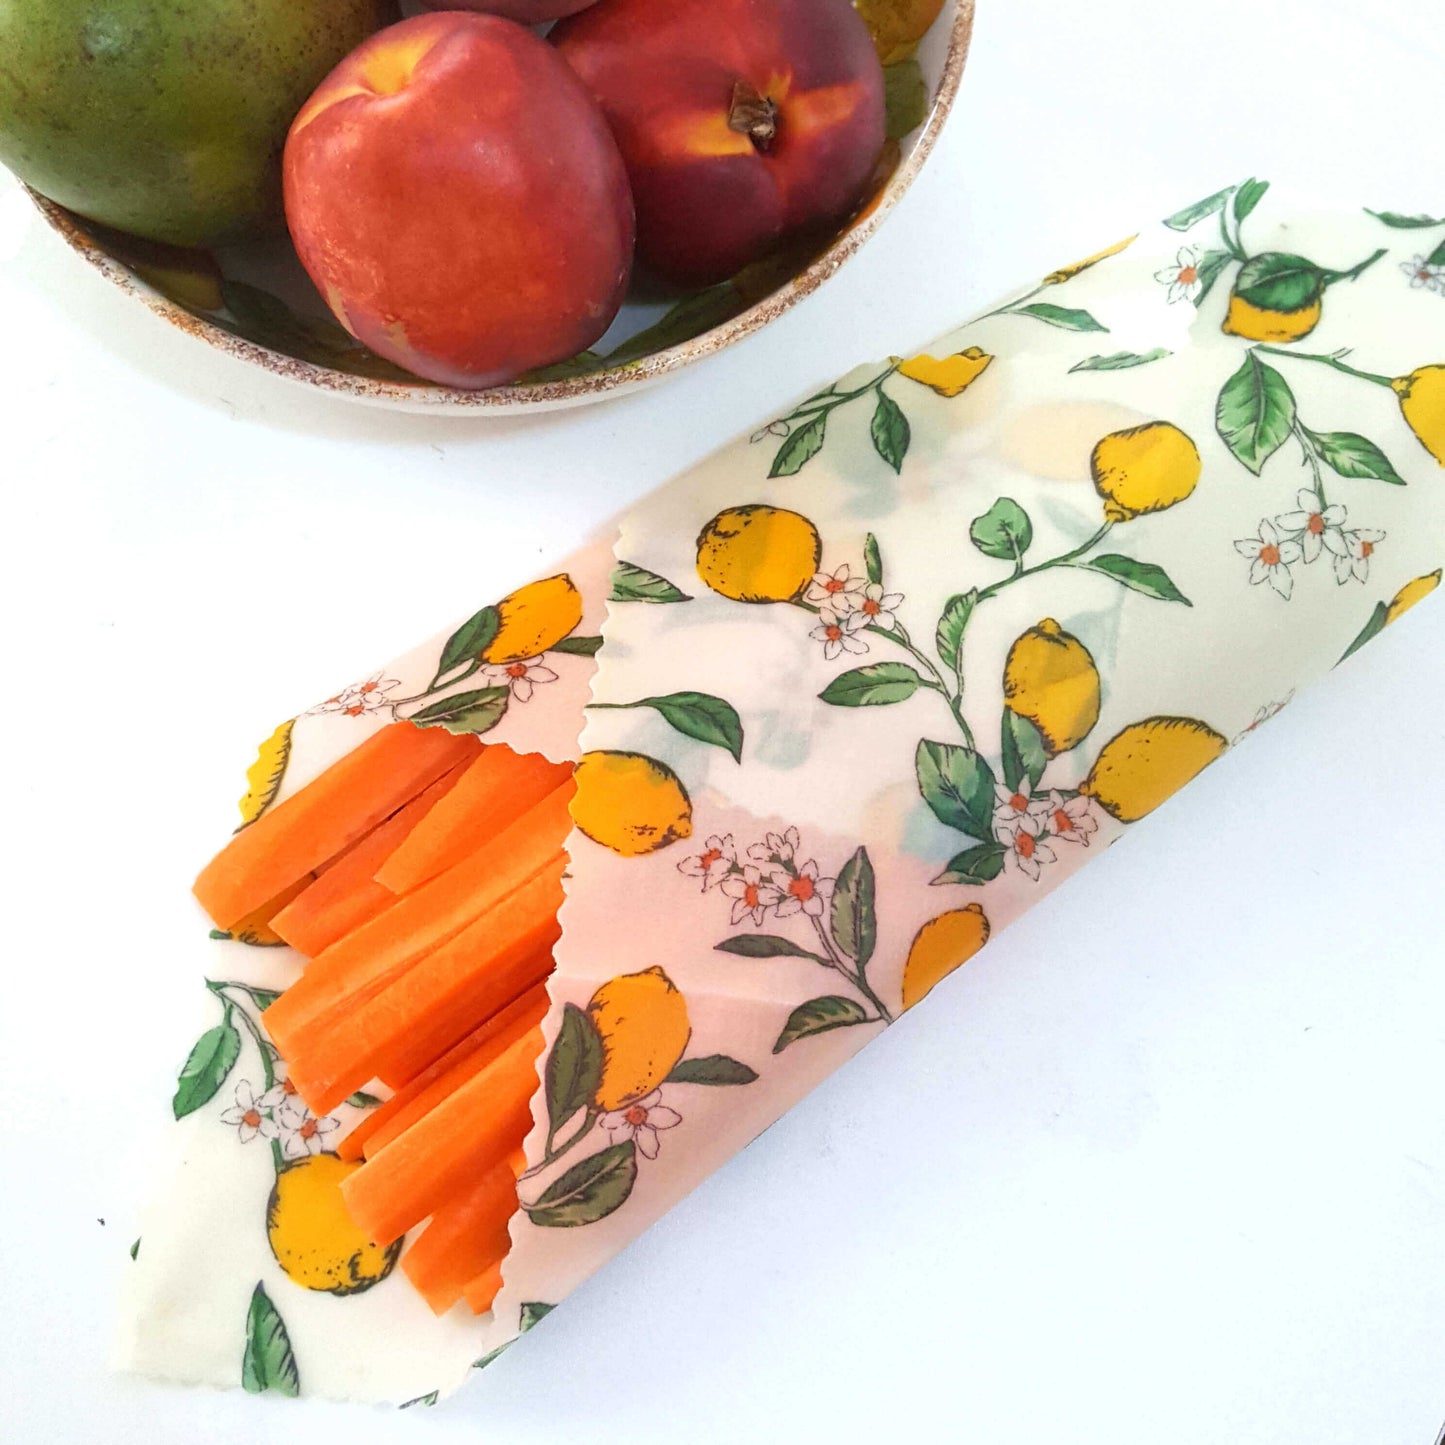 Reusable Beeswax Food Wraps 100% Hand Made in the UK by Honey Bee Good. Planet-Kind single large beeswax wrap in Lemons pattern as flatlay with carrots